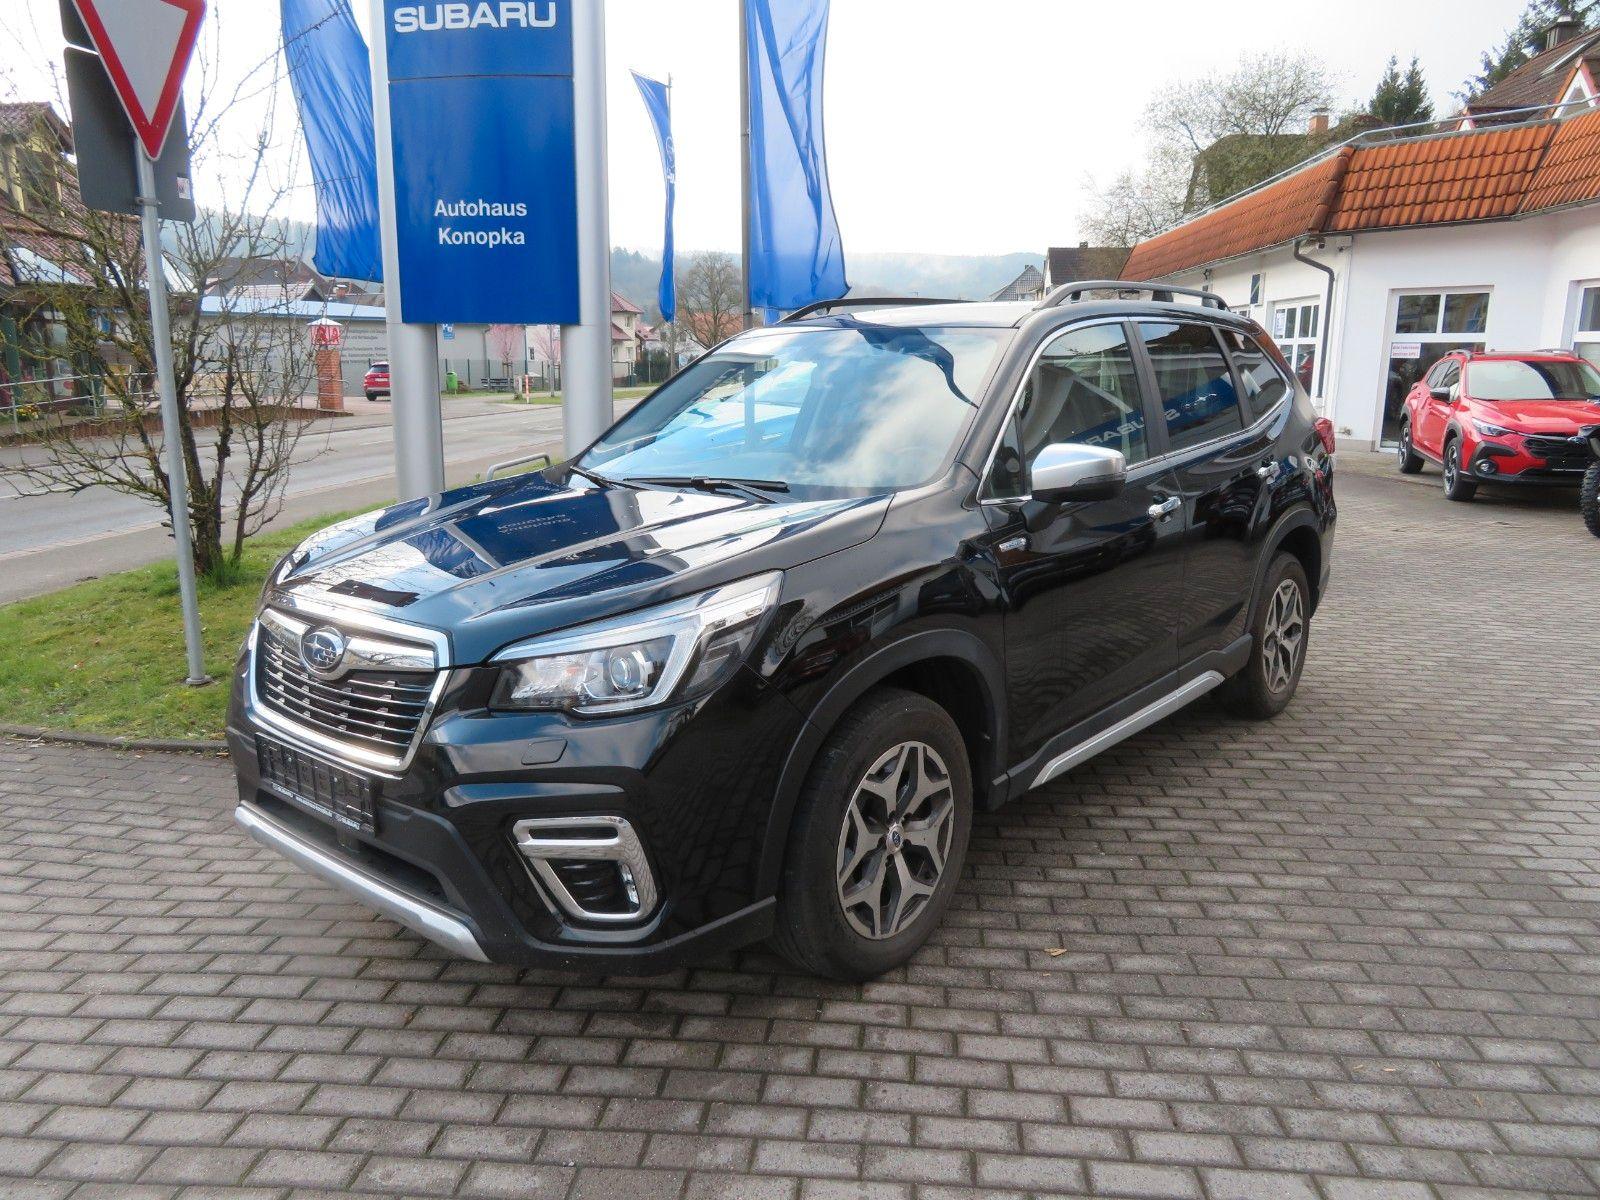 SUBARU Forester 2.0ie Comfort Lineartronic+AHK